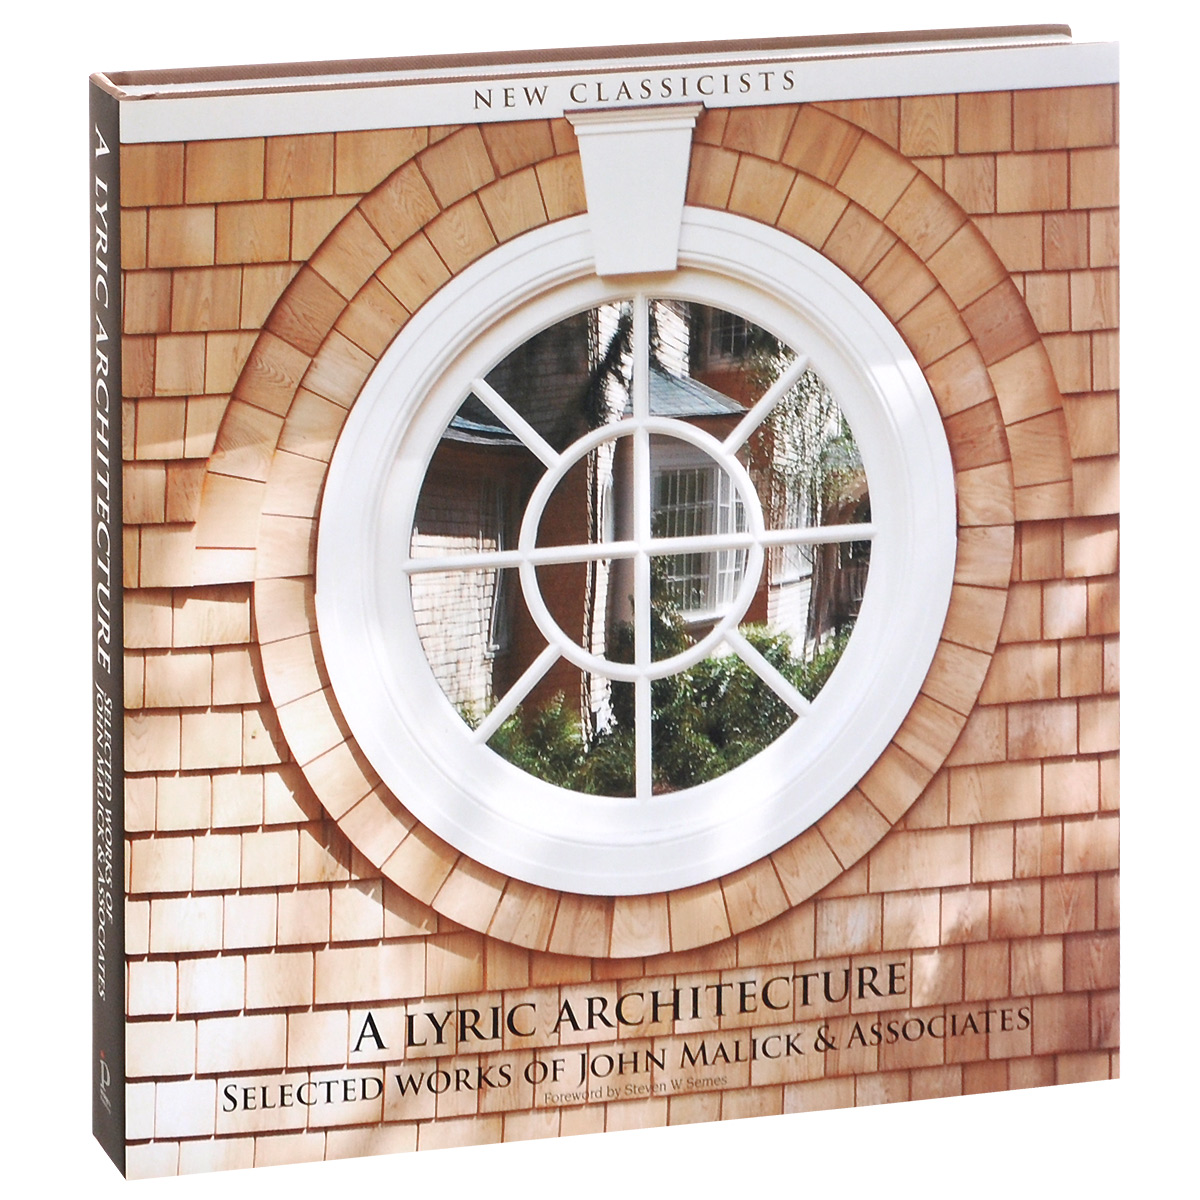 A Lyric Architecture: Selected Works of John Malick and Associates